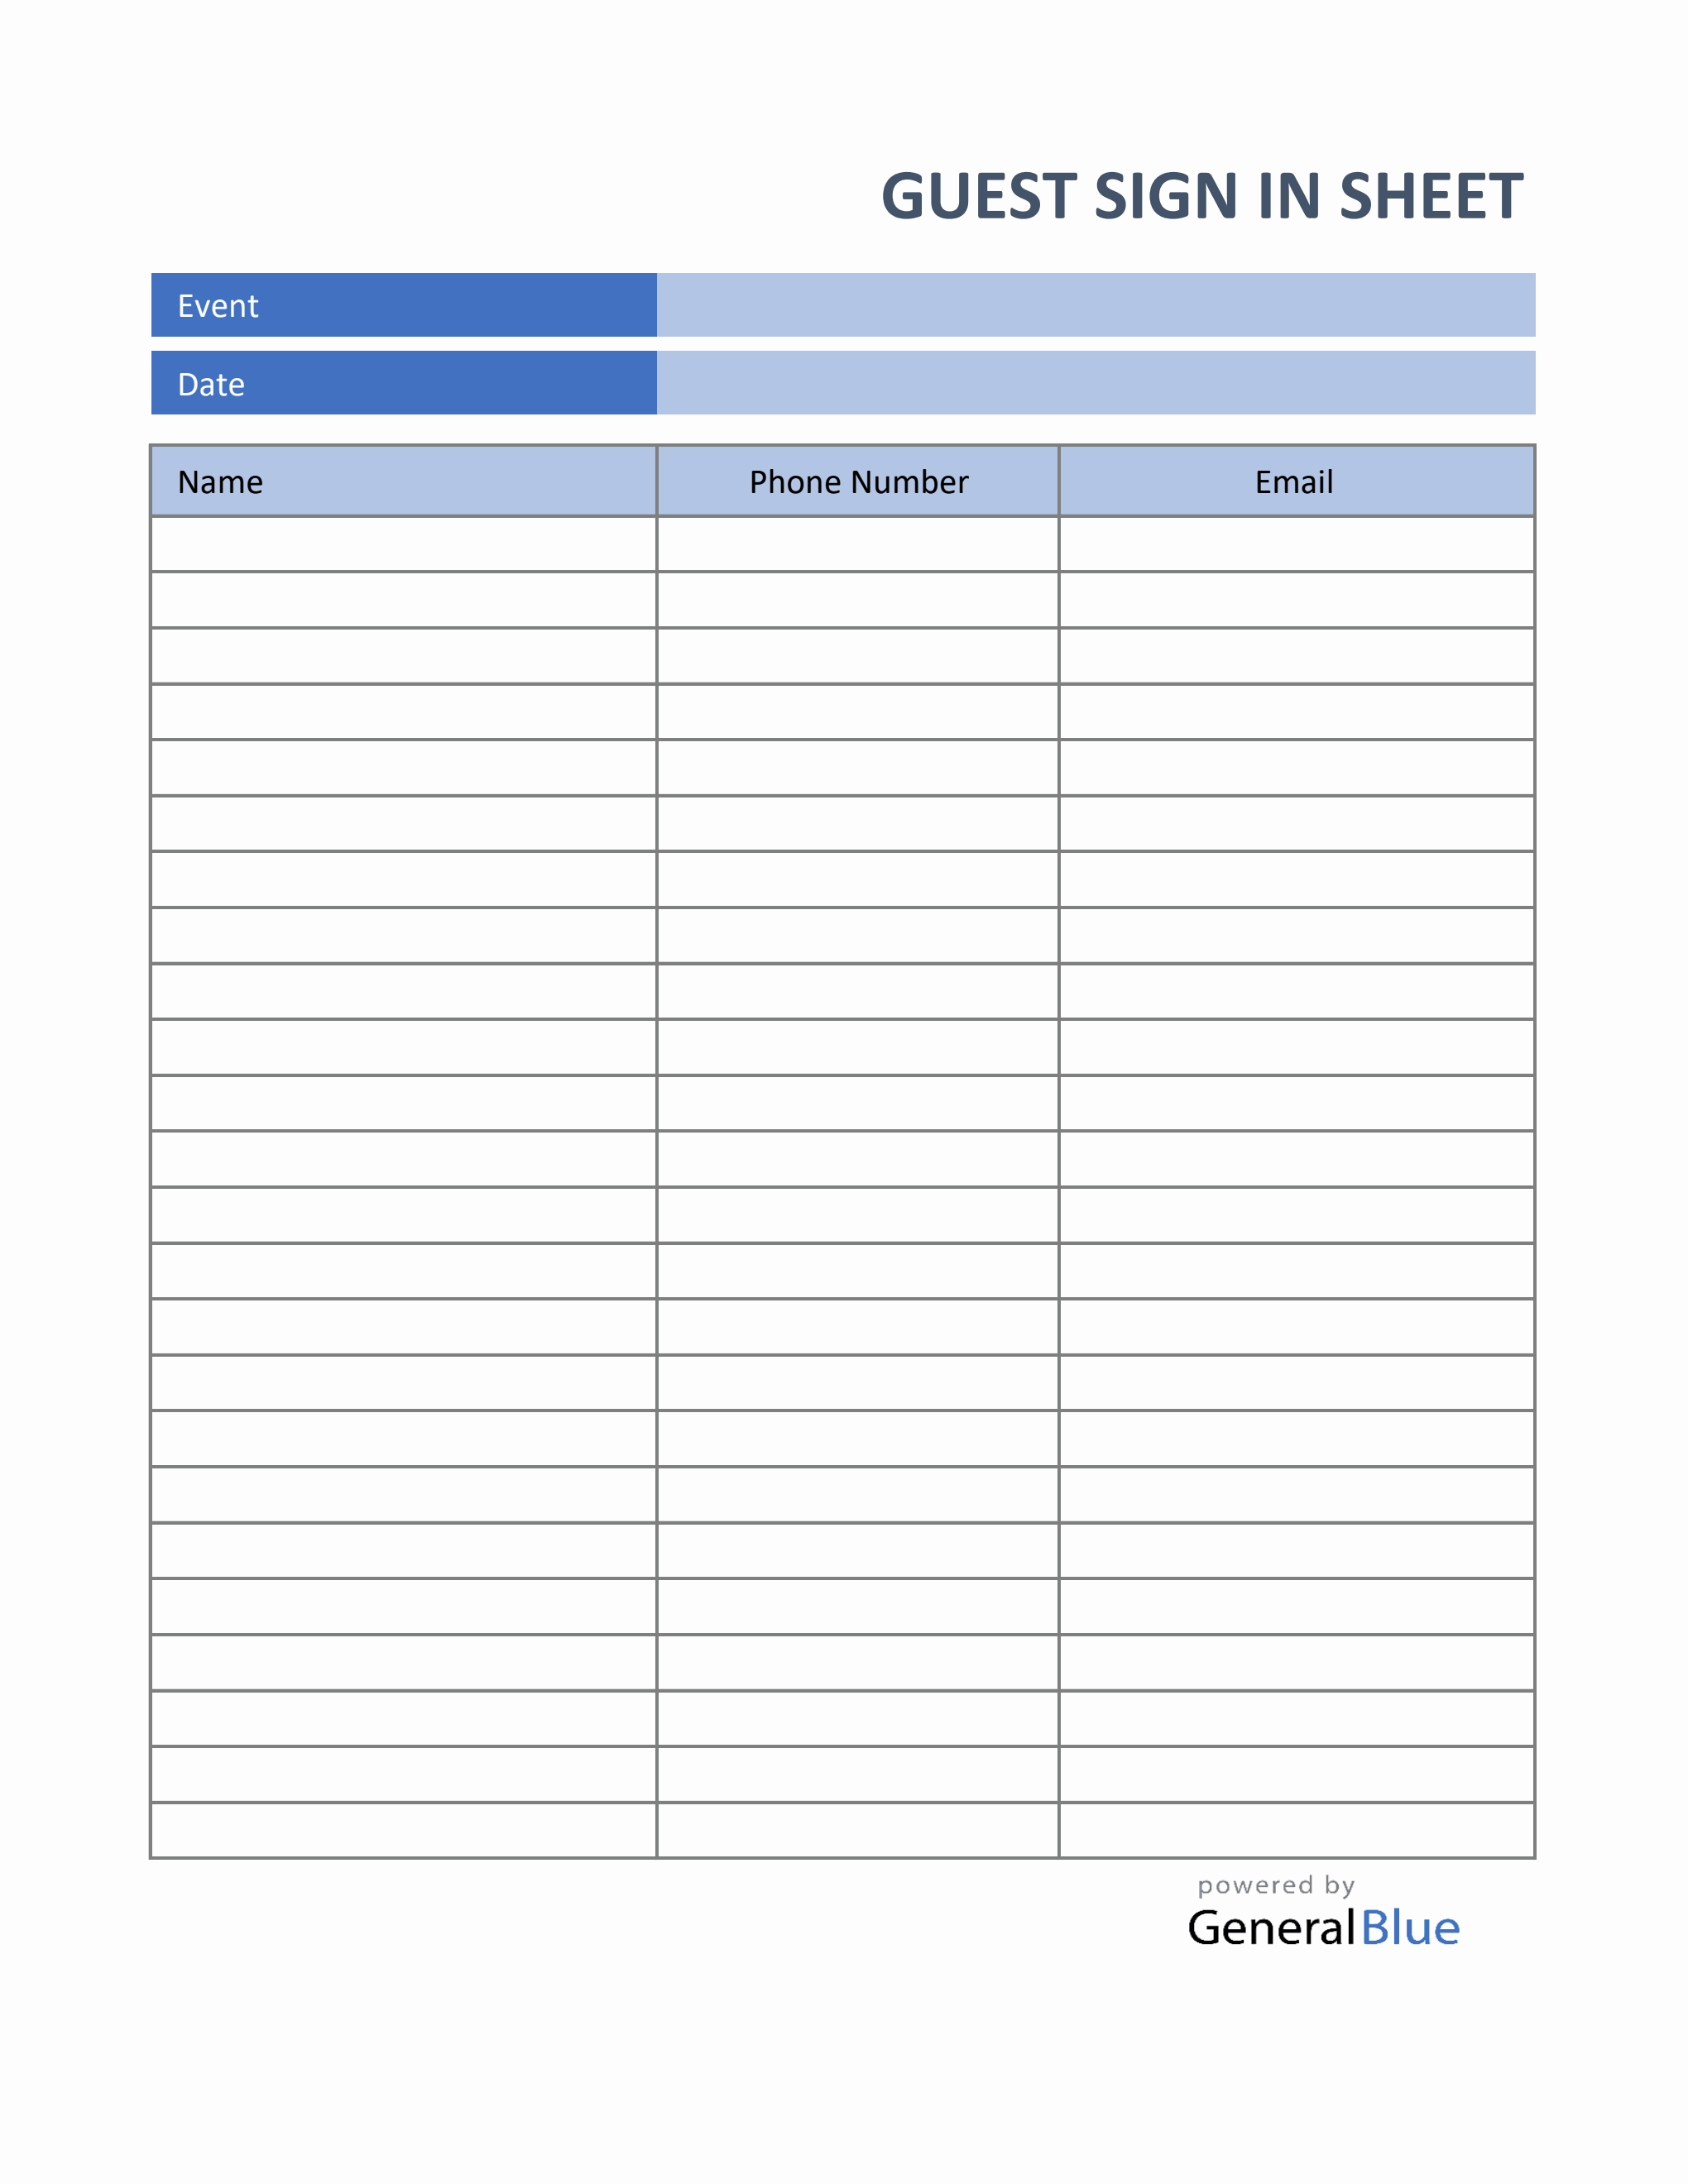 how do i create a sign in sheet in excel